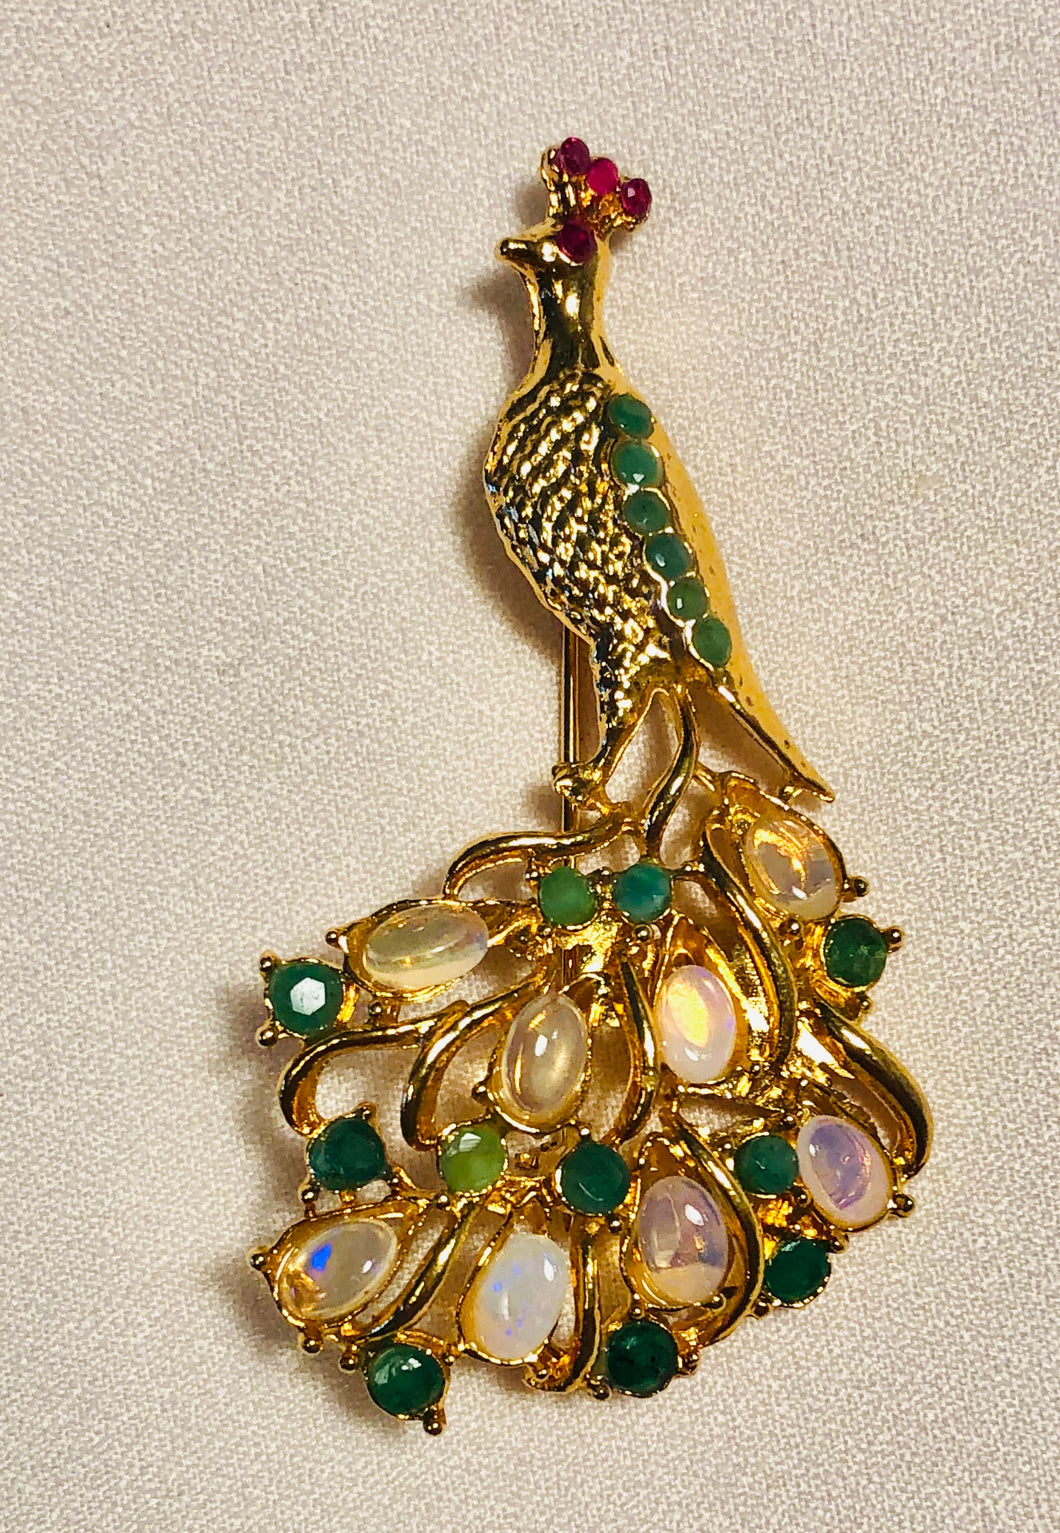 Genuine Emerald, Ruby and Opal Peacock Brooch